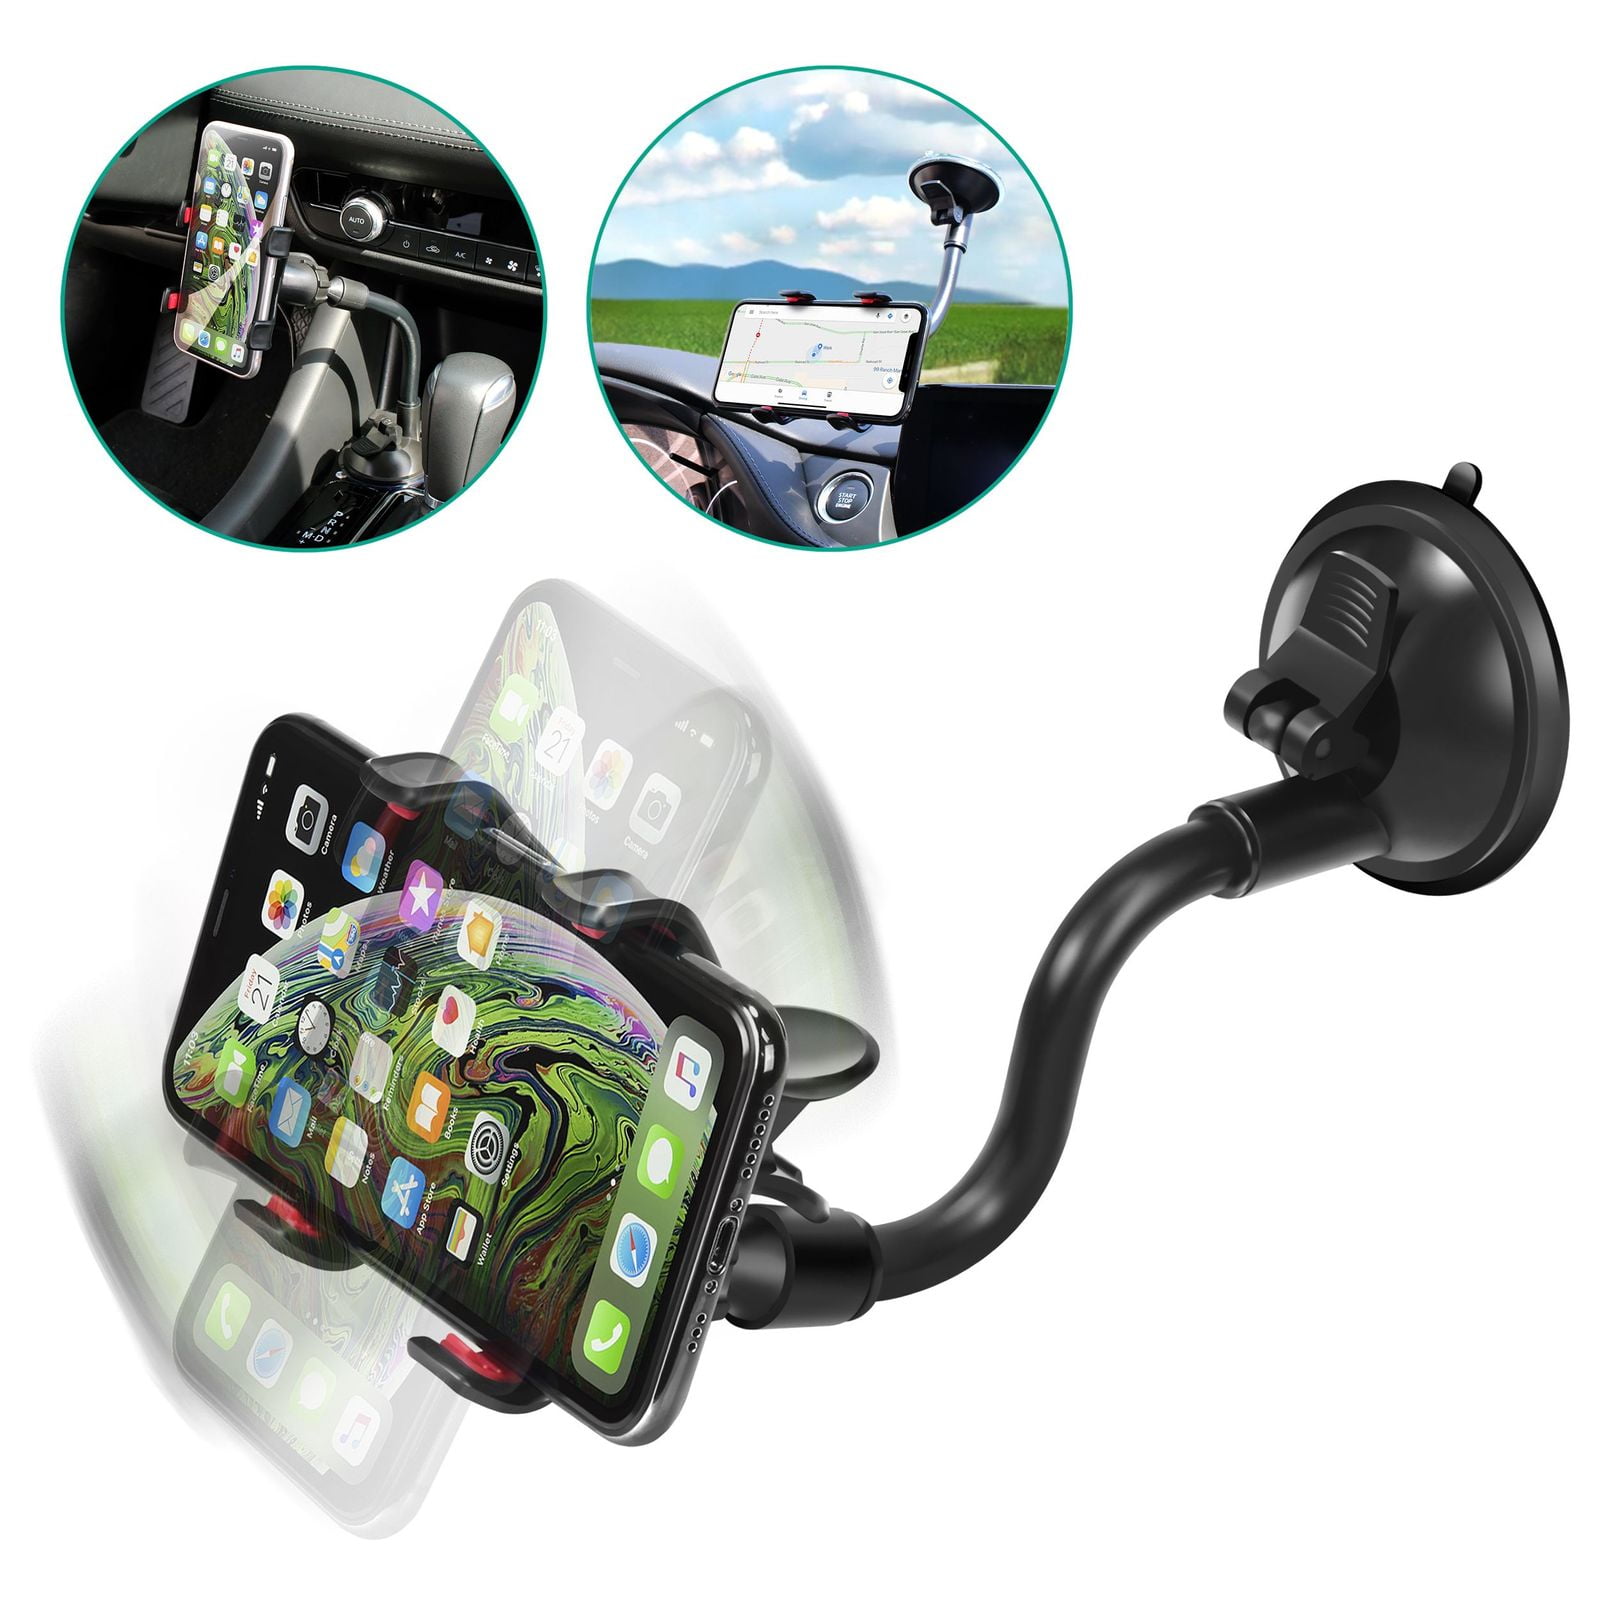  VANMASS 2024 Upgrade【Top Military-Grade】 Car Phone Holder,  【Newest & Strongest Suction】 Cell Phone Car Mount Windshield Dashboard Vent  Truck Stand Cradle for iPhone 15 Pro Max 14 13 12 Android 